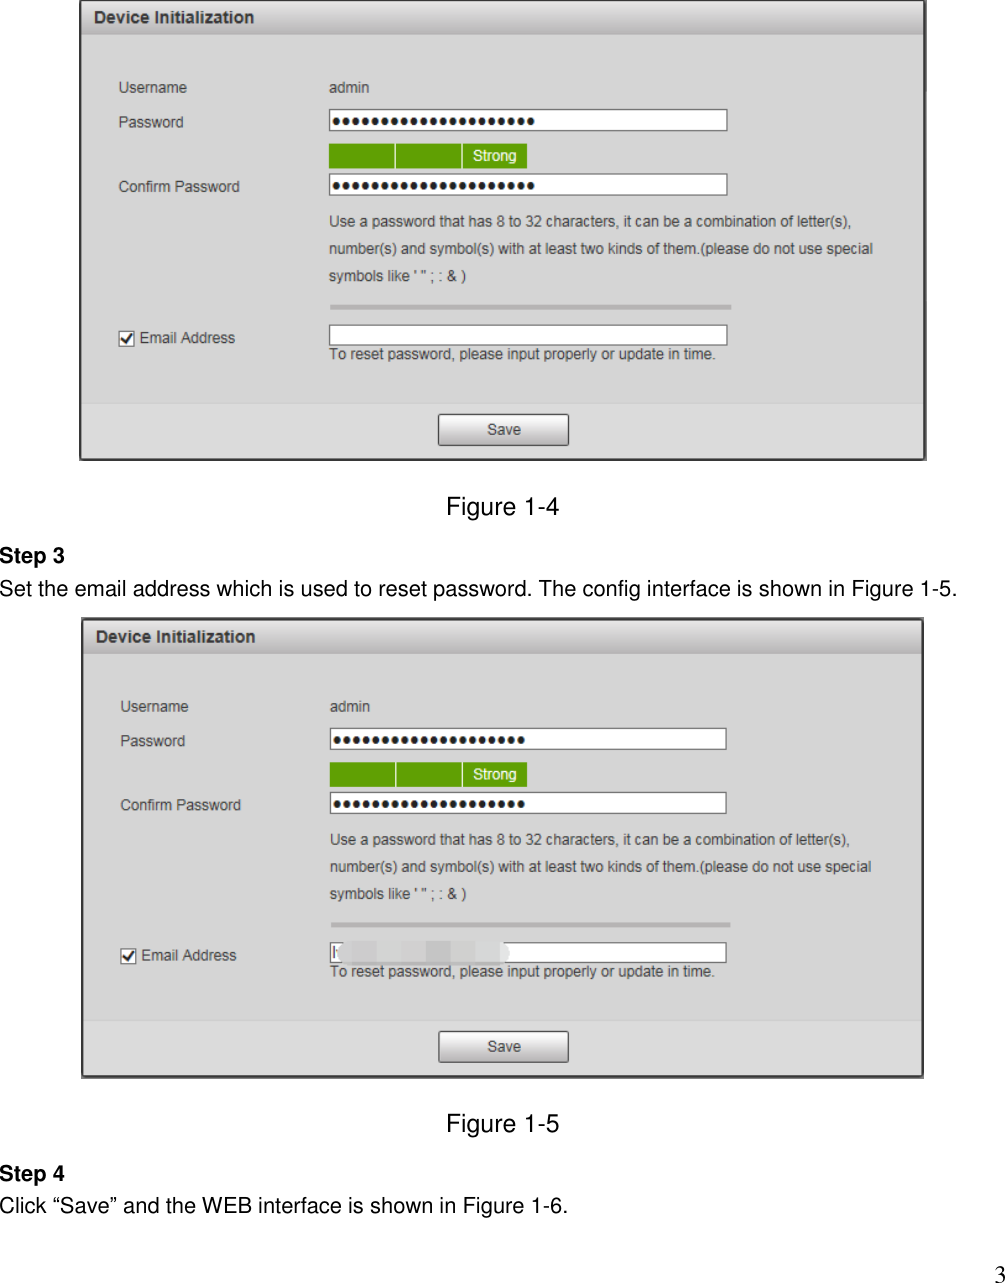                                                                              3  Figure 1-4 Step 3 Set the email address which is used to reset password. The config interface is shown in Figure 1-5.  Figure 1-5 Step 4 Click “Save” and the WEB interface is shown in Figure 1-6. 